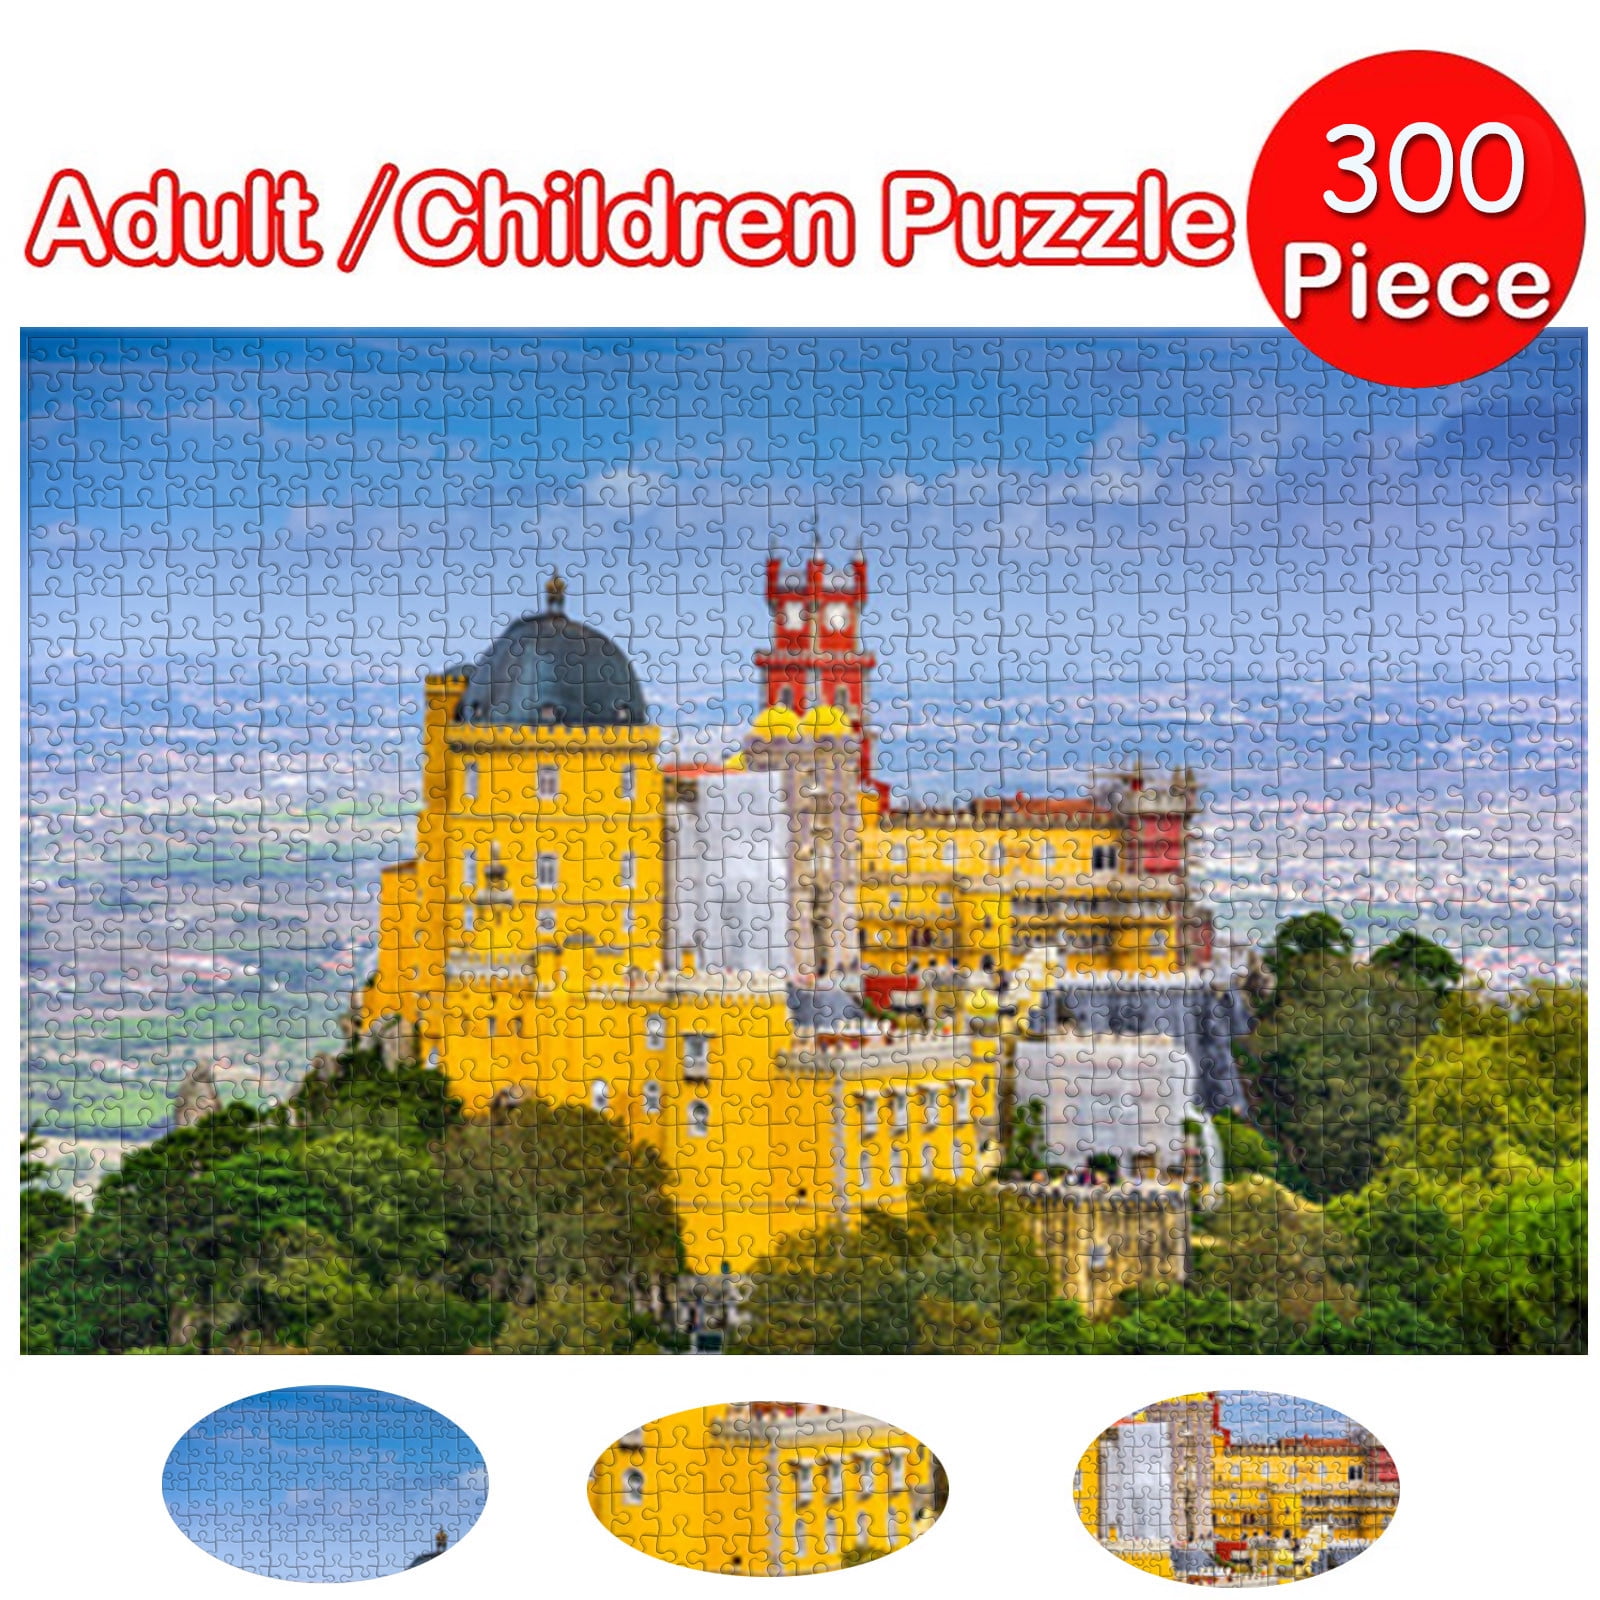 Puzzles for Adults 5000 Piece Jigsaw pig-5000 Adult Puzzle 5000 or Jigsaw Puzzle Brain IQ Developing Magical Game